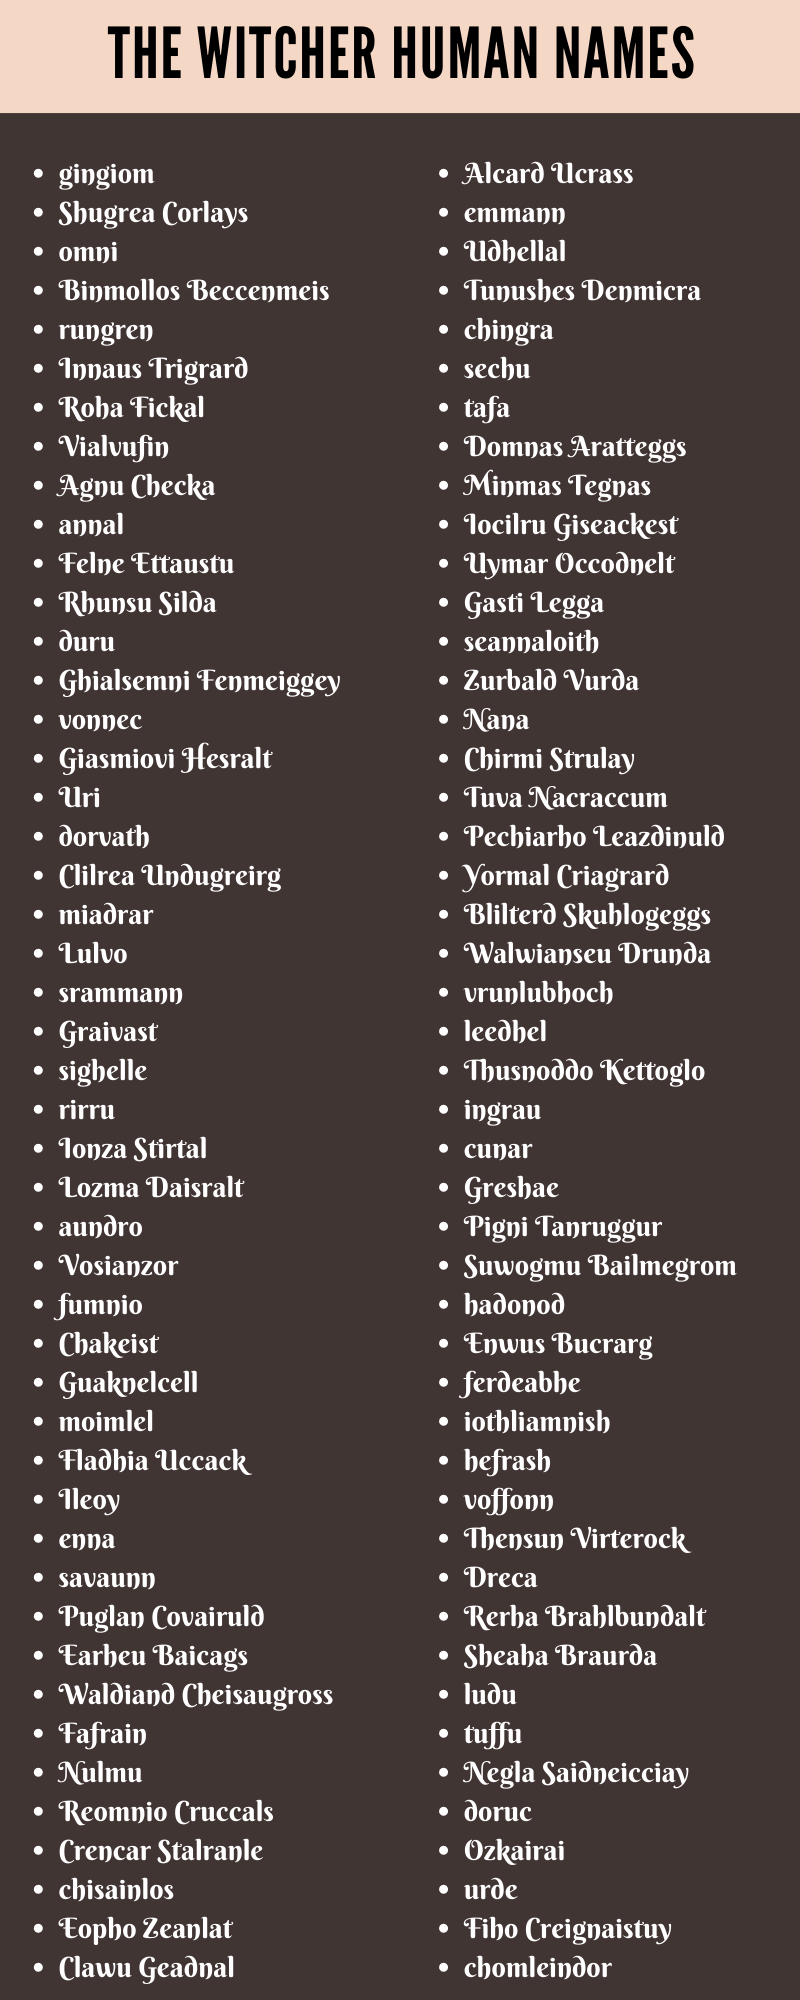 The Witcher Human Names